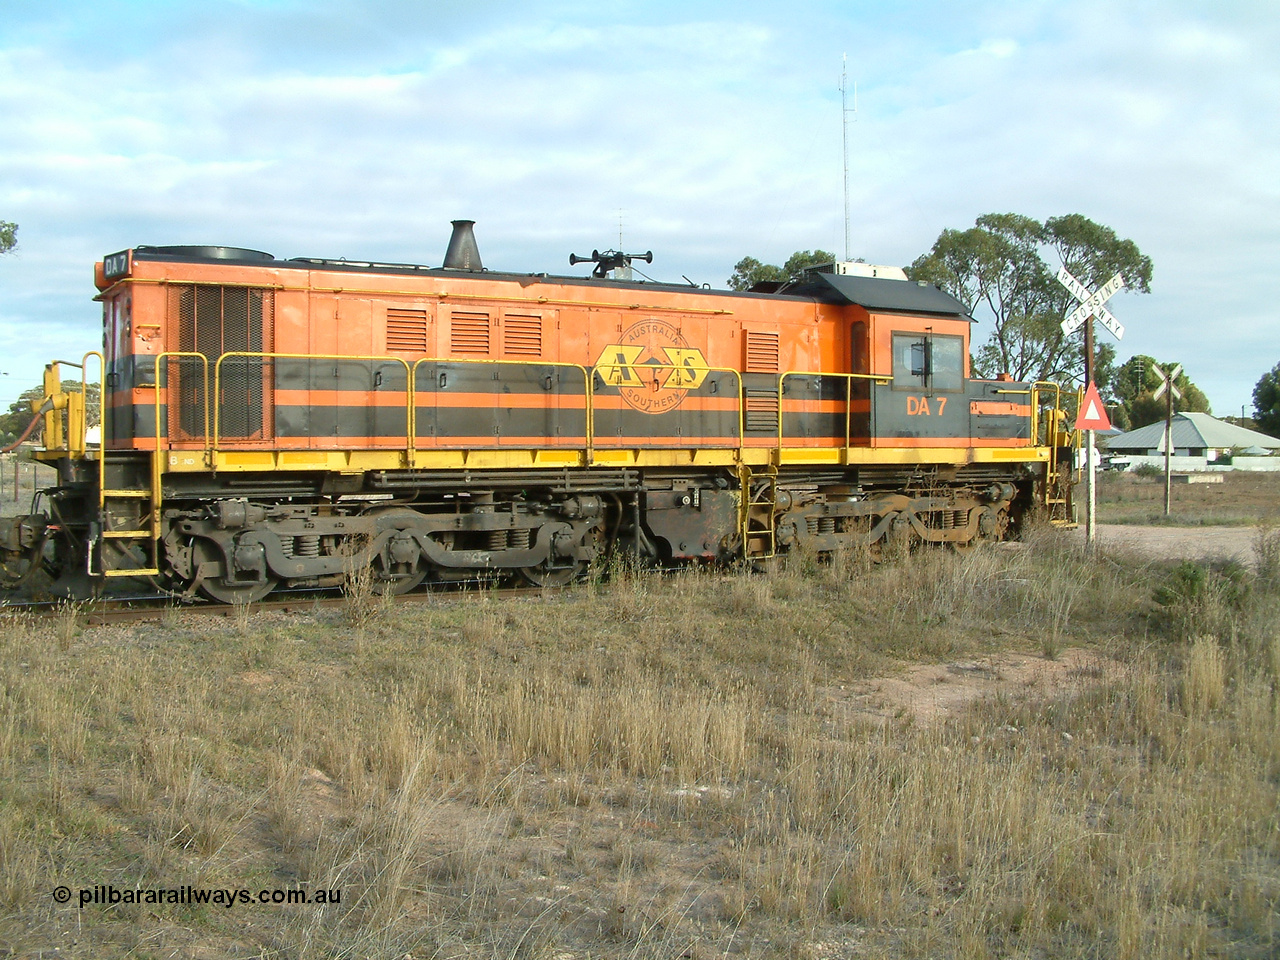 030409 080113
Warramboo, empty grain train stopped for a crew change. Rebuild unit DA 7 in Australian Southern orange and black livery shows its original heritage body style of an NSWGR 48 class 4813 AE Goodwin ALCo model DL531 serial 83713, rebuilt by Islington Workshops SA with long hood and parts from former 830 class 870 AE Goodwin ALCo model DL531 serial G6016-06 in 1998.
Keywords: DA-class;DA7;83713;Port-Augusta-WS;ALCo;DL531G/1;48-class;4813;rebuild;